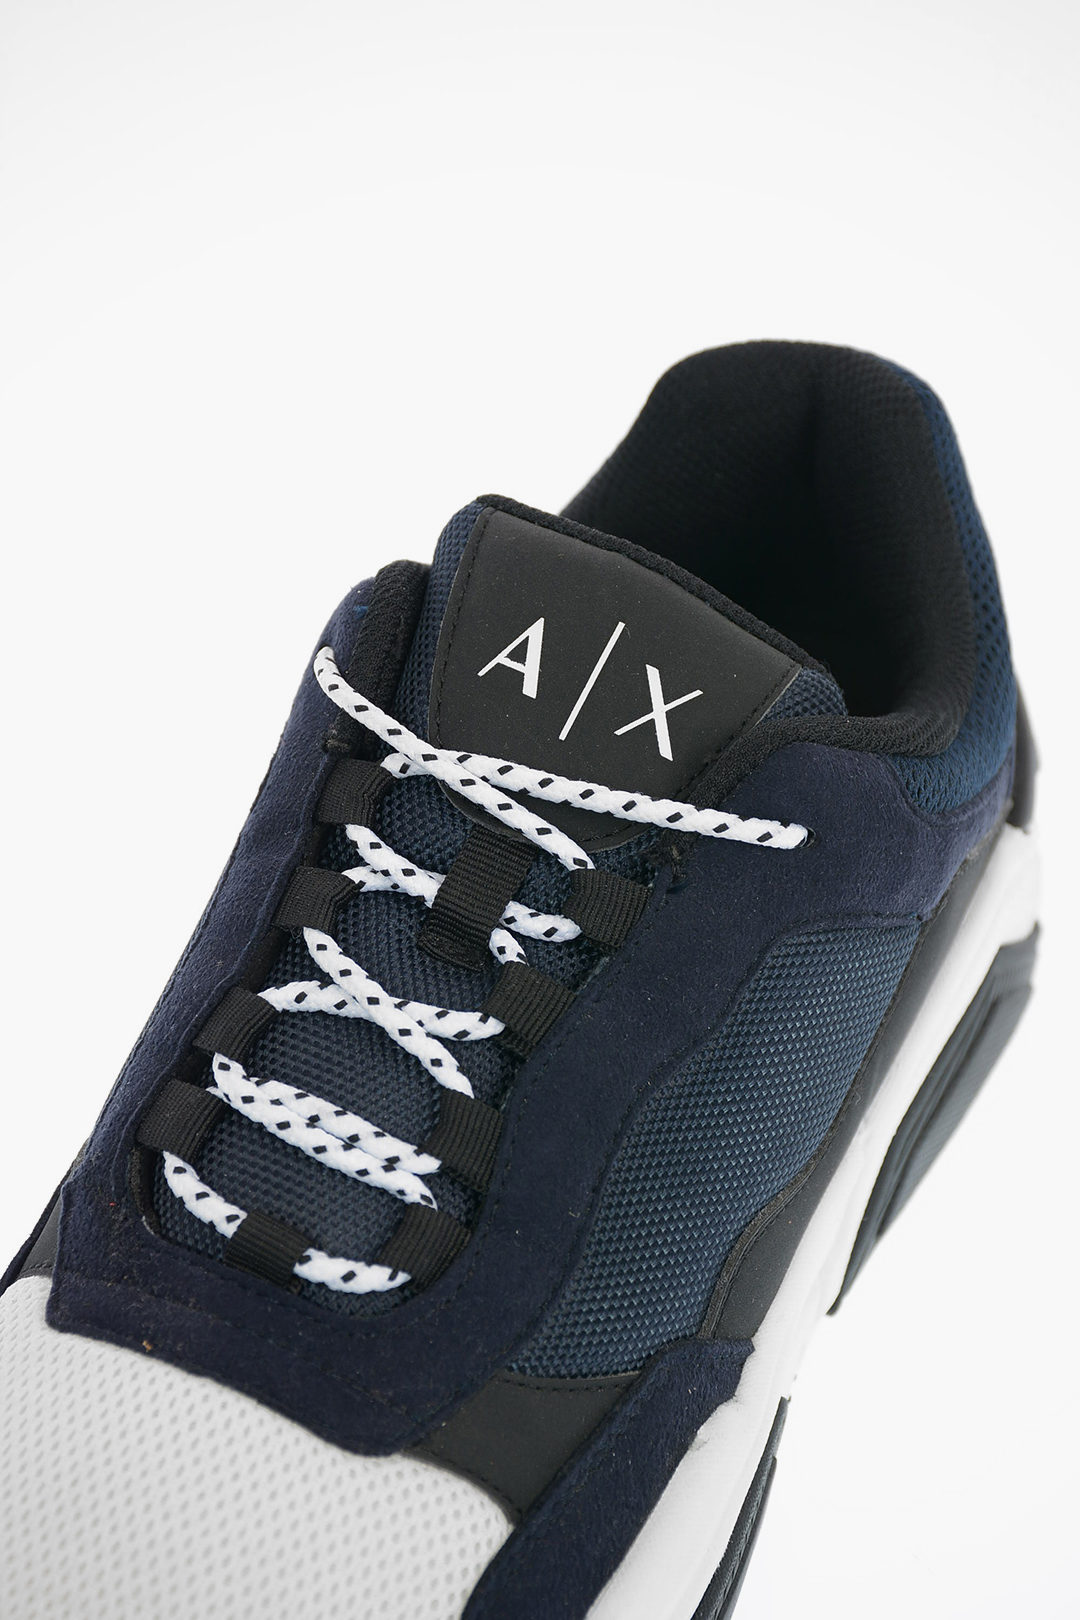 Armani ARMANI EXCHANGE Fabric and Leather Sneakers men - Glamood Outlet